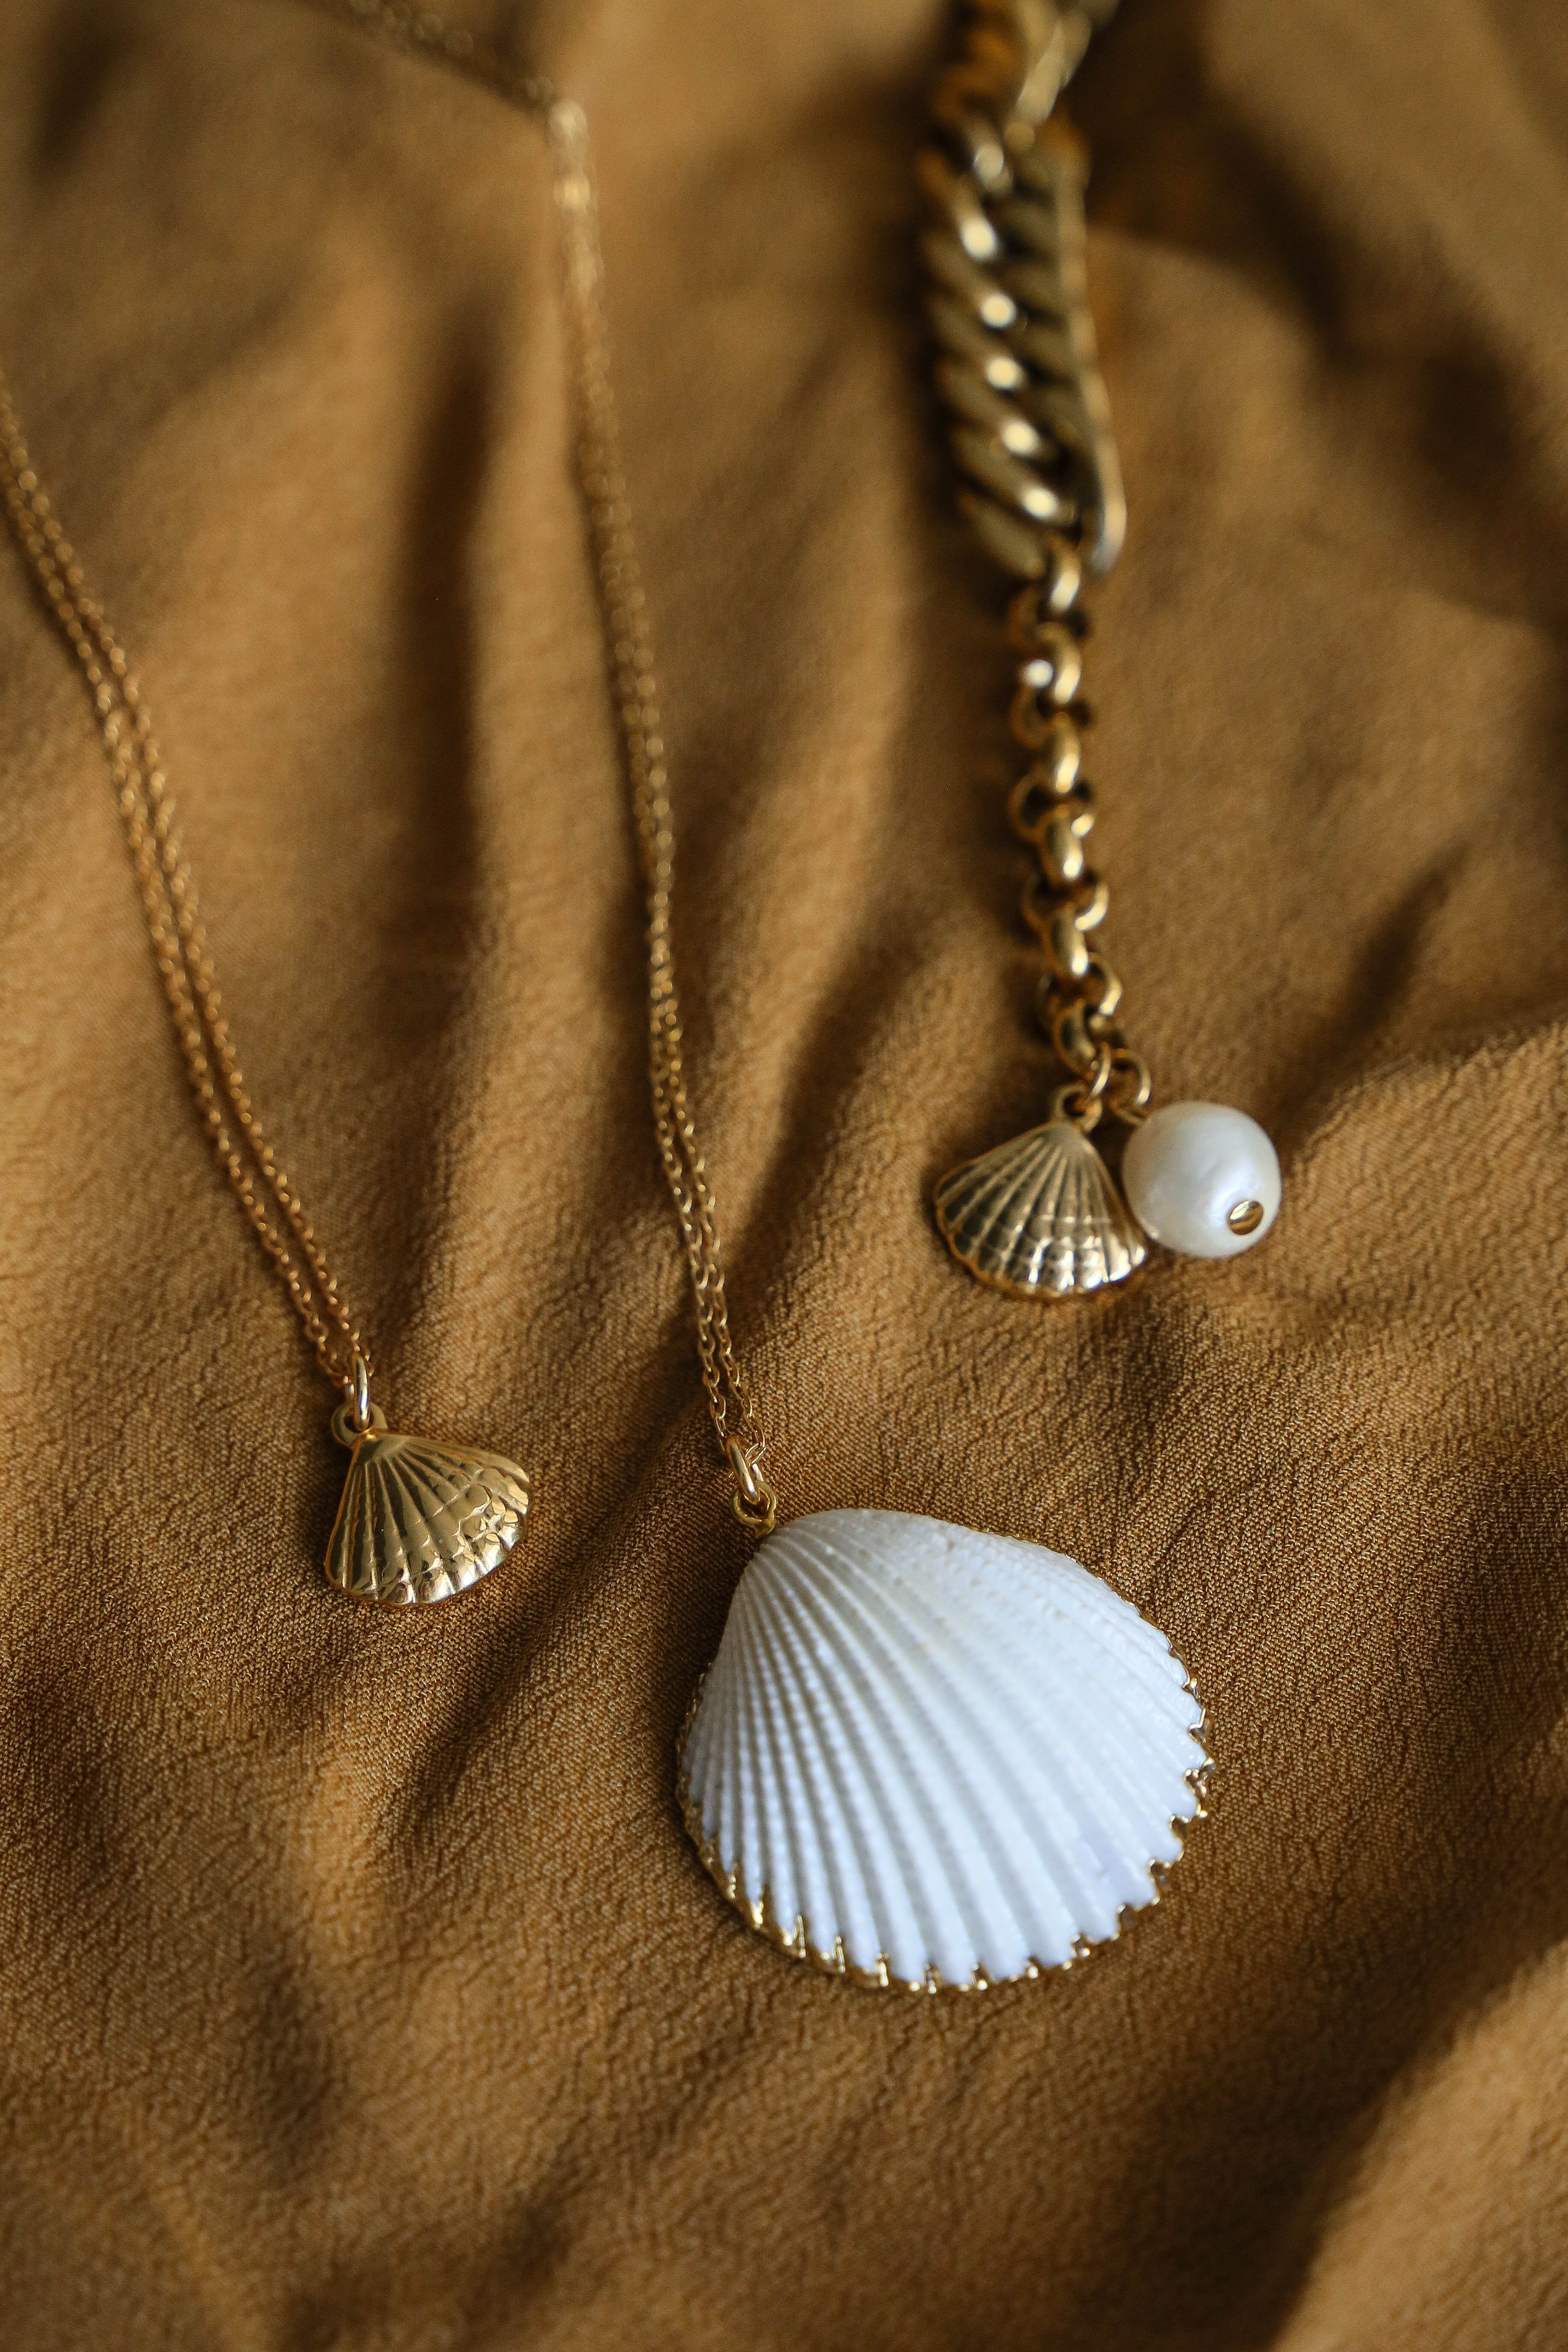 La Mer Necklace - Boutique Minimaliste has waterproof, durable, elegant and vintage inspired jewelry